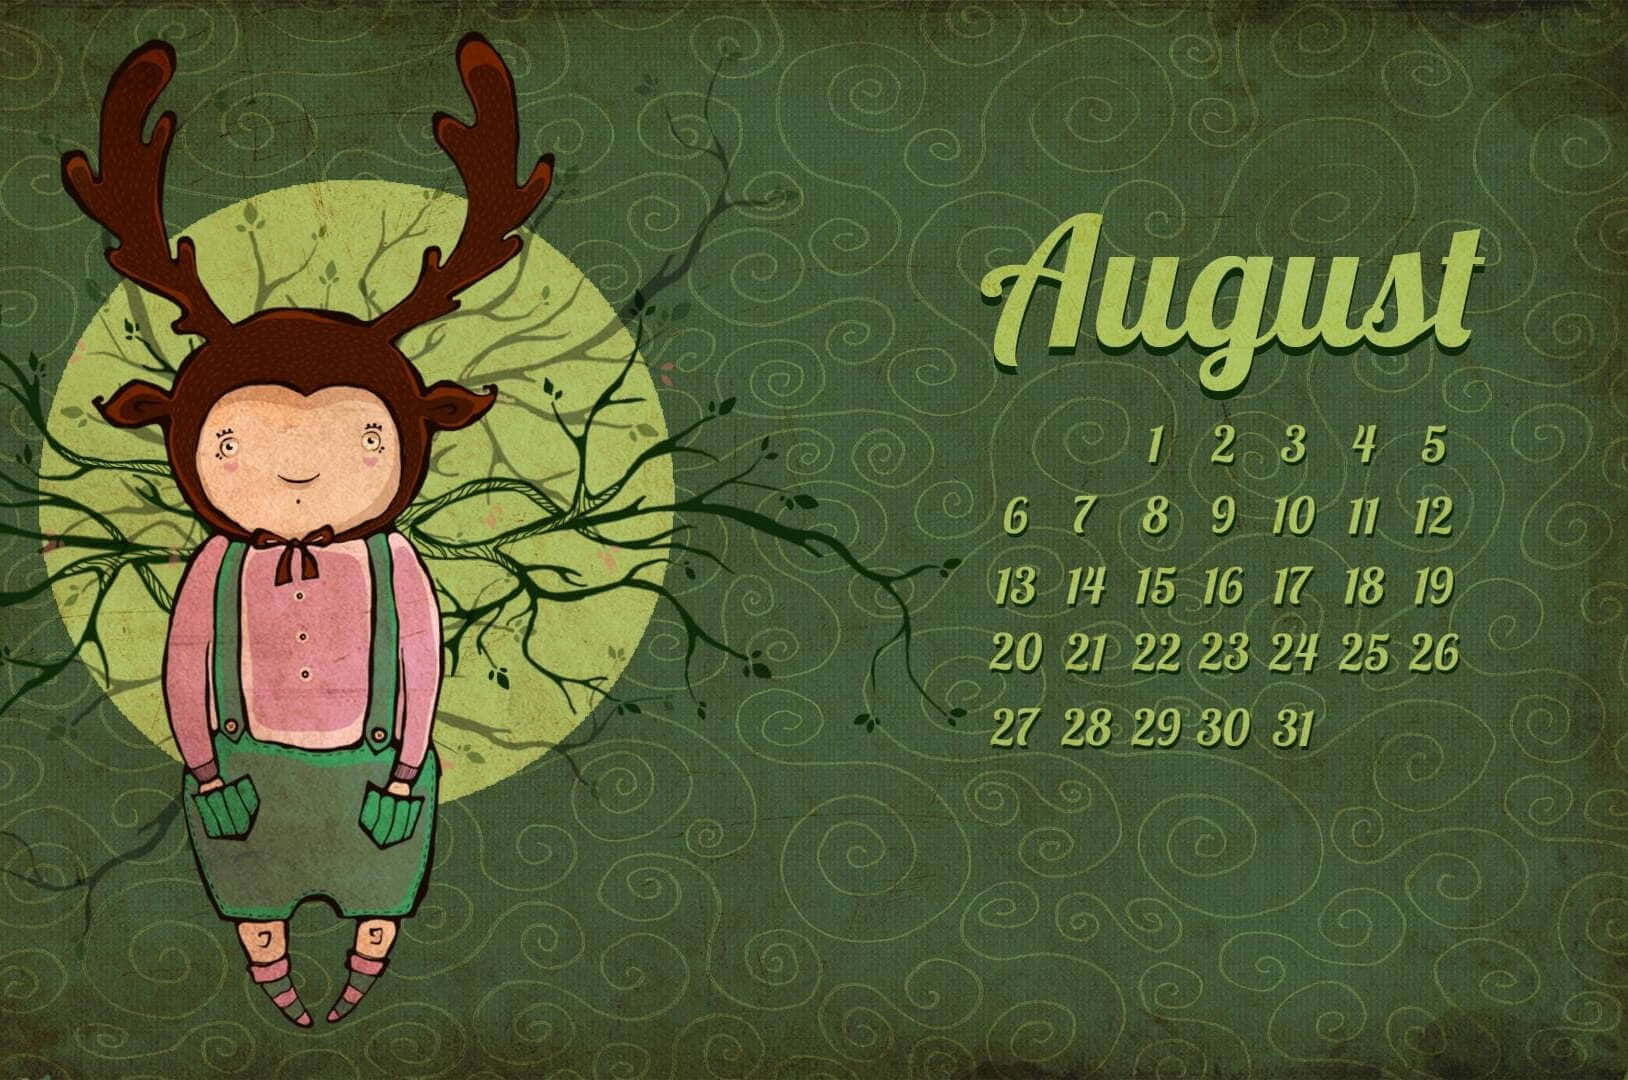 Enjoy the Sunny Days of August